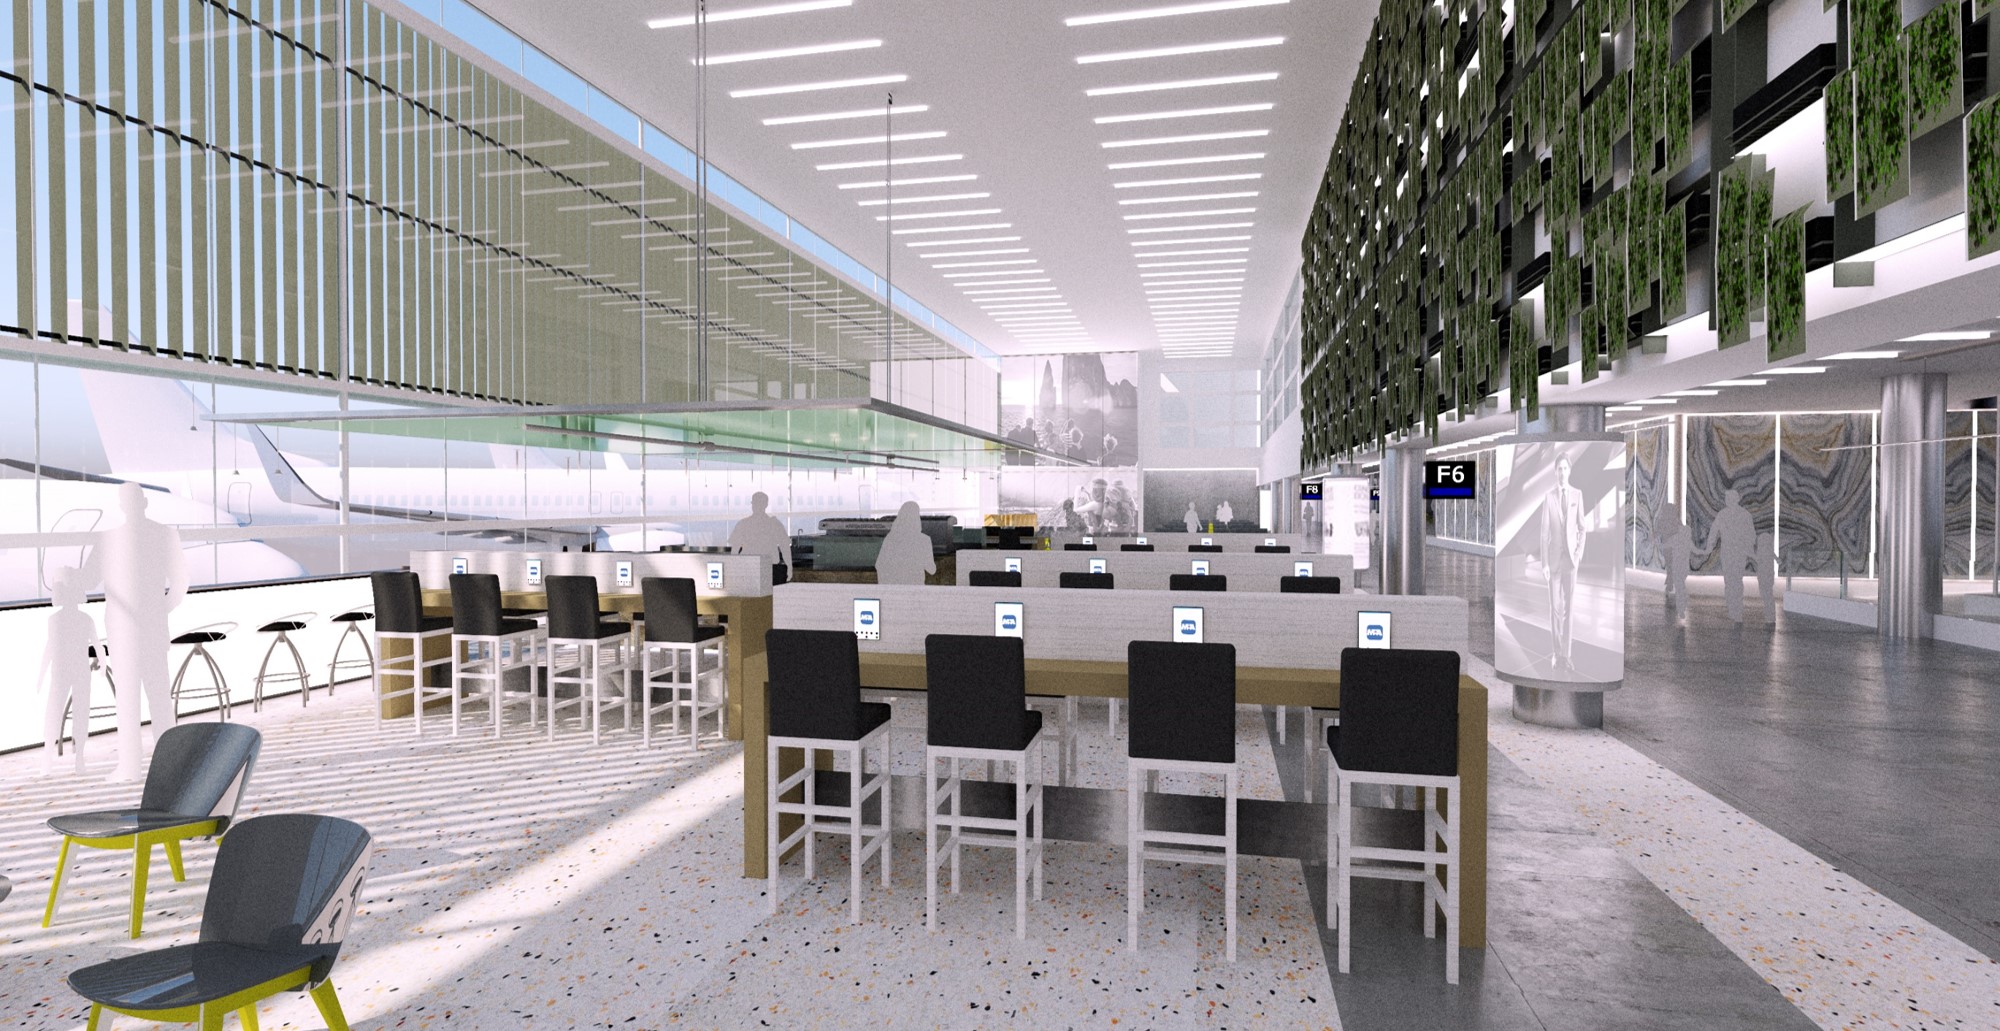 Miami International Airport Announces Project to Increase Capacity to 80 Million Passengers